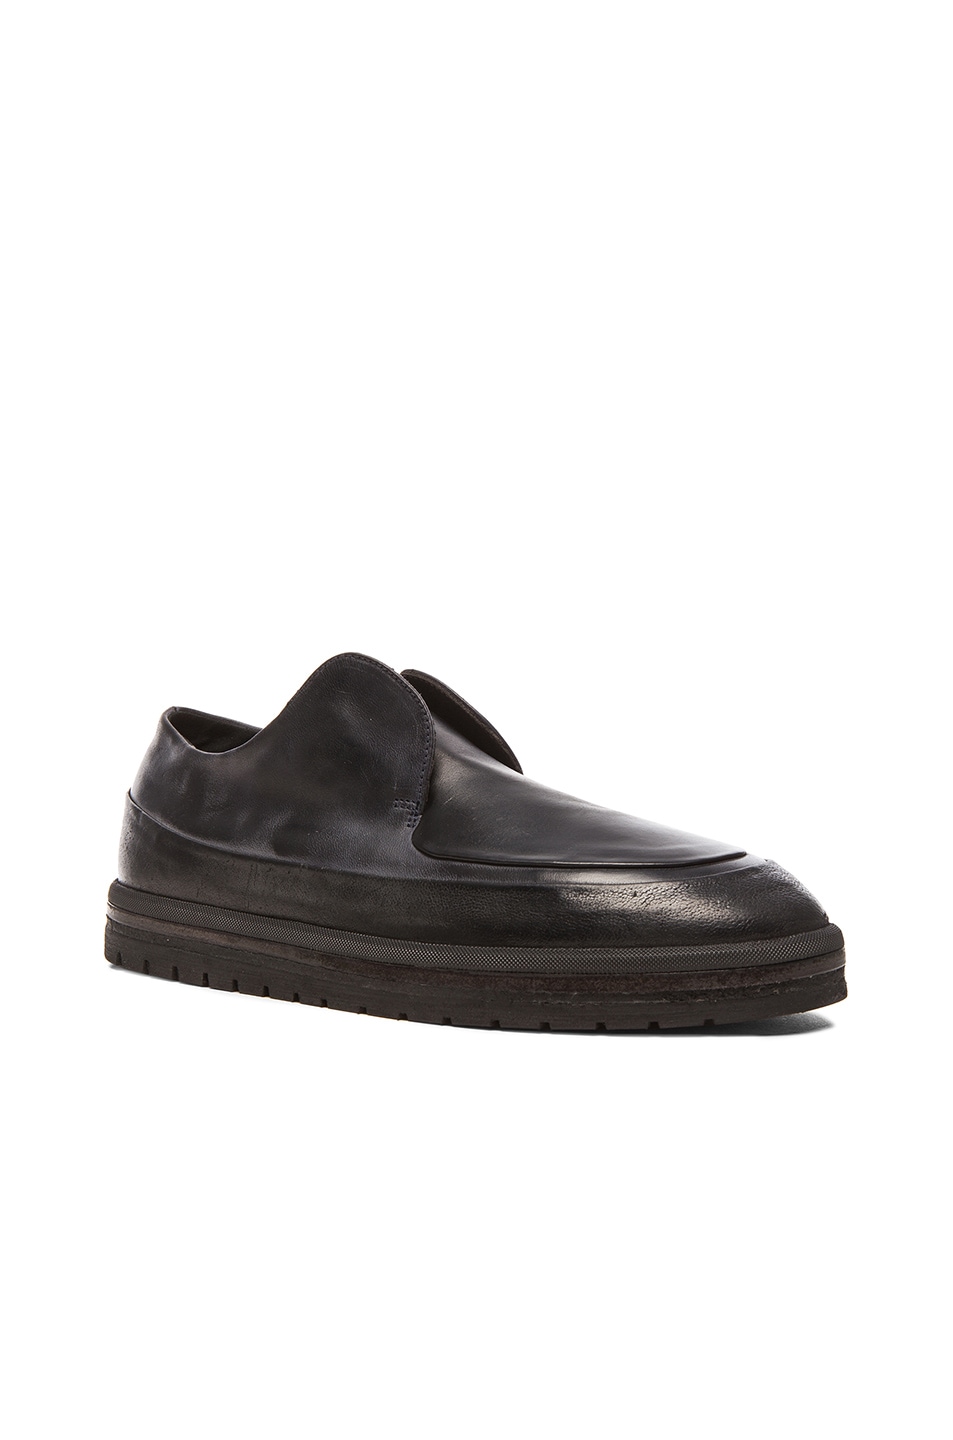 Image 1 of Marsell Platform Laceless Leather Dress Shoes in Black